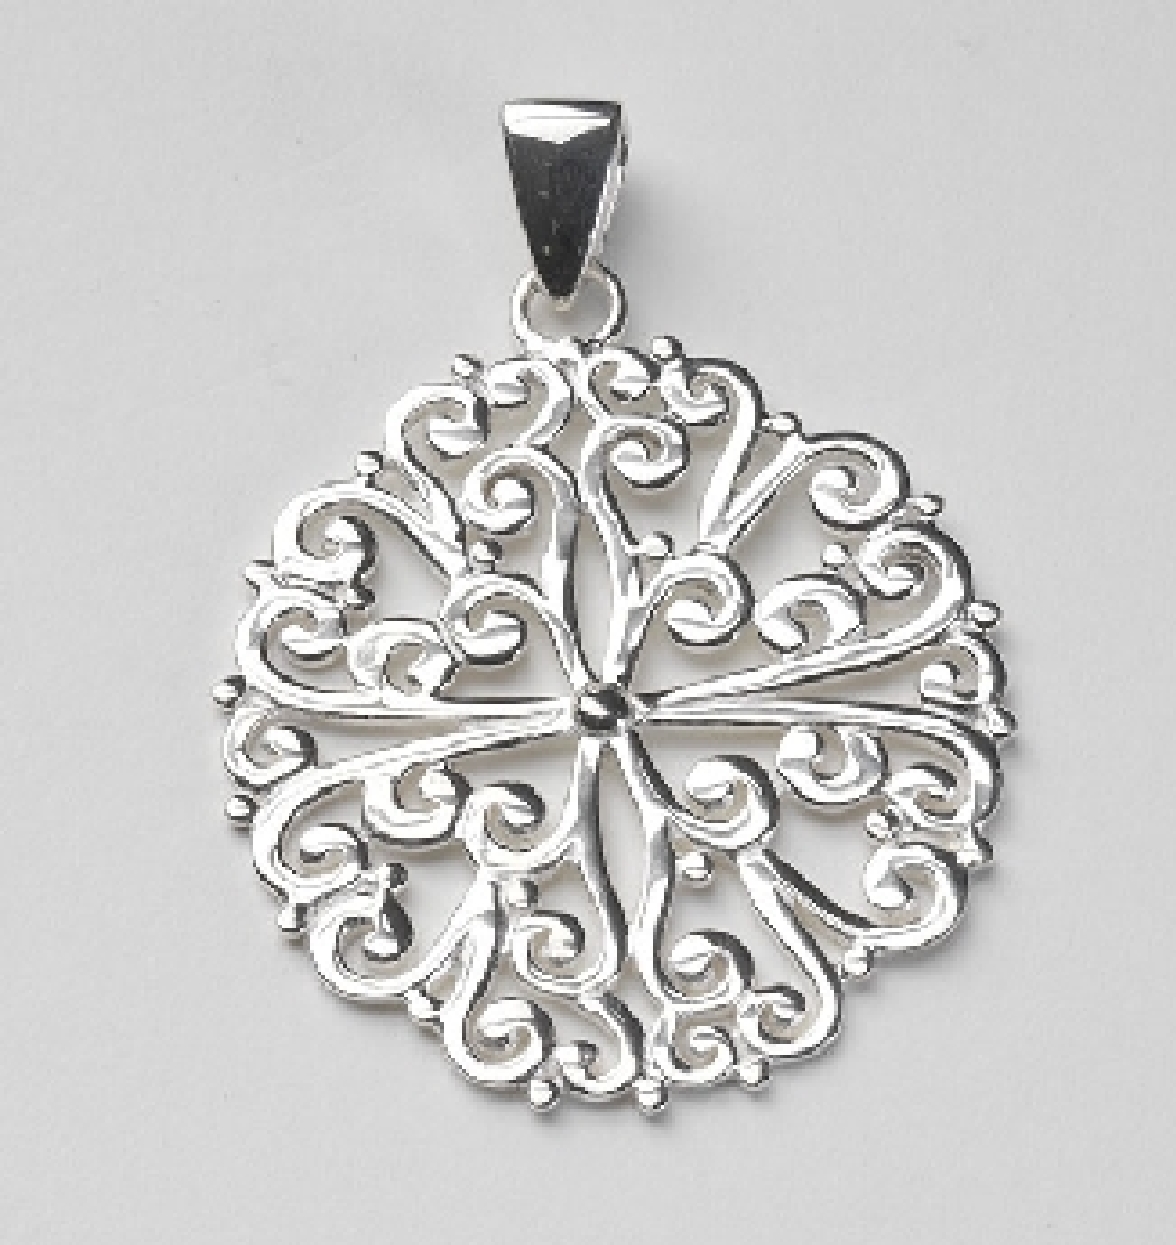 Southern Gates Sterling Silver Pendant round; large. Size 1-3/4   high including bale by 1-1/4   wide.
P218

Discontinued
